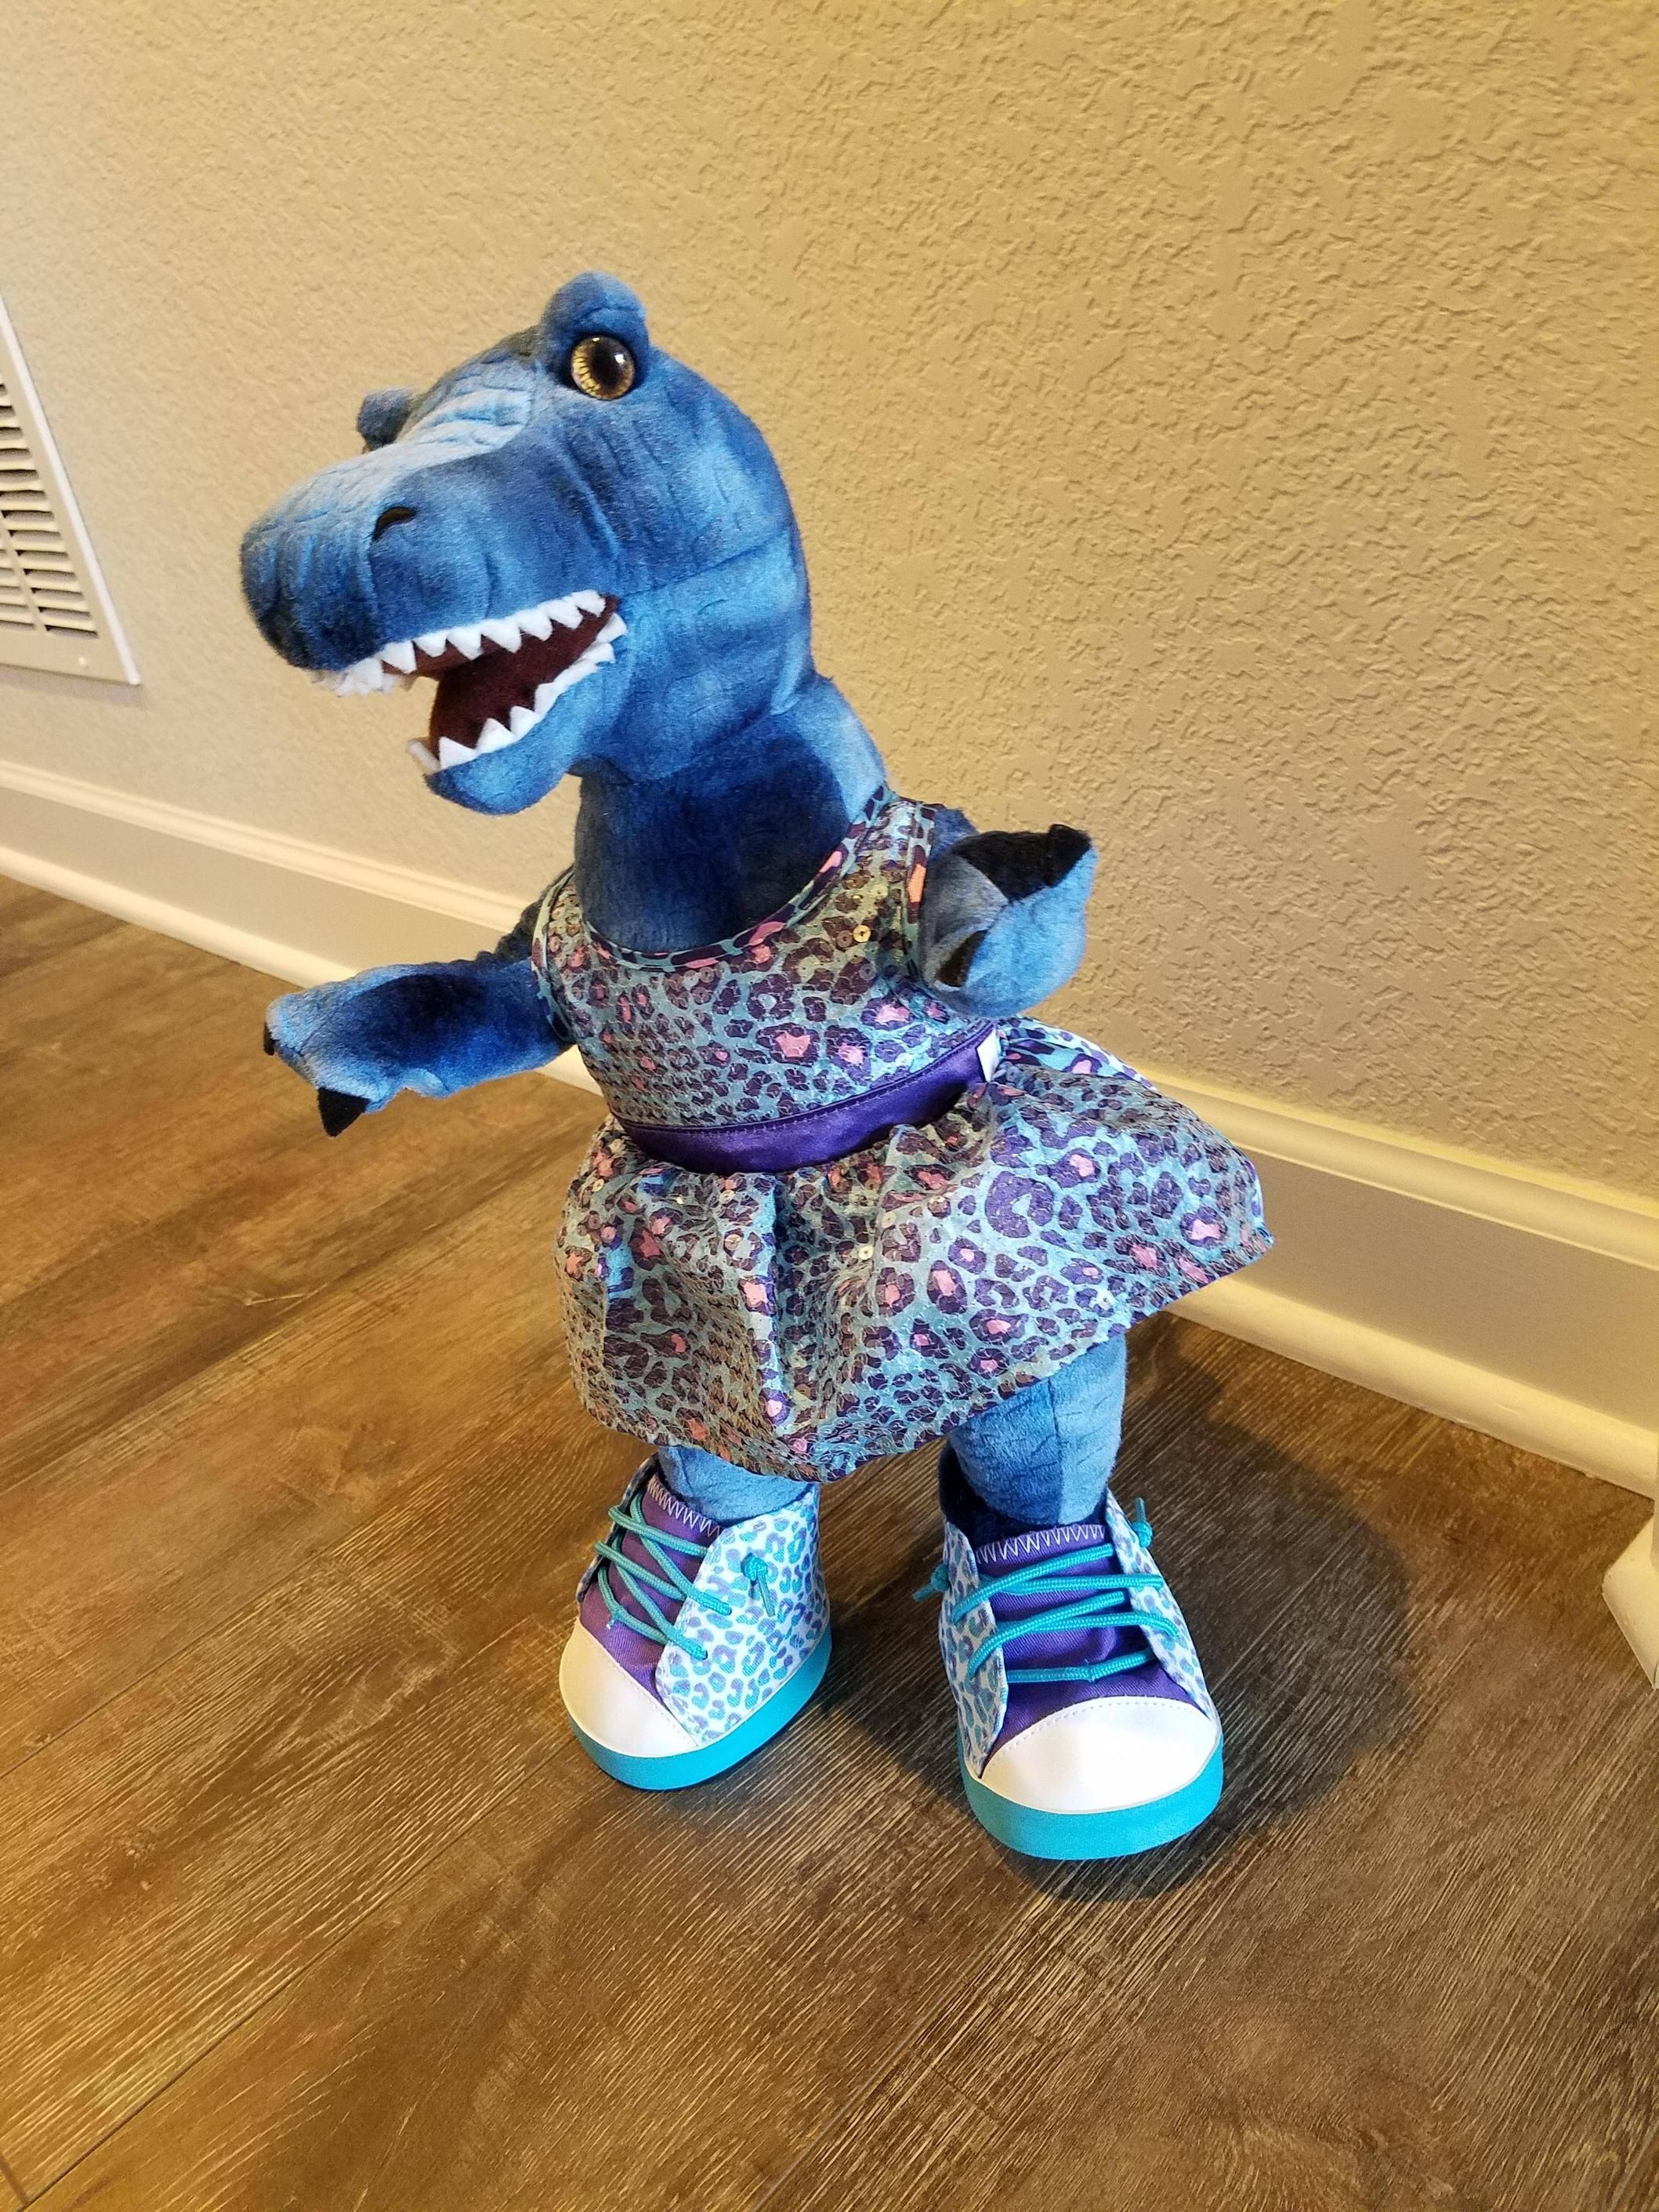 My 2 year old daughter's Build-A-Bear creation